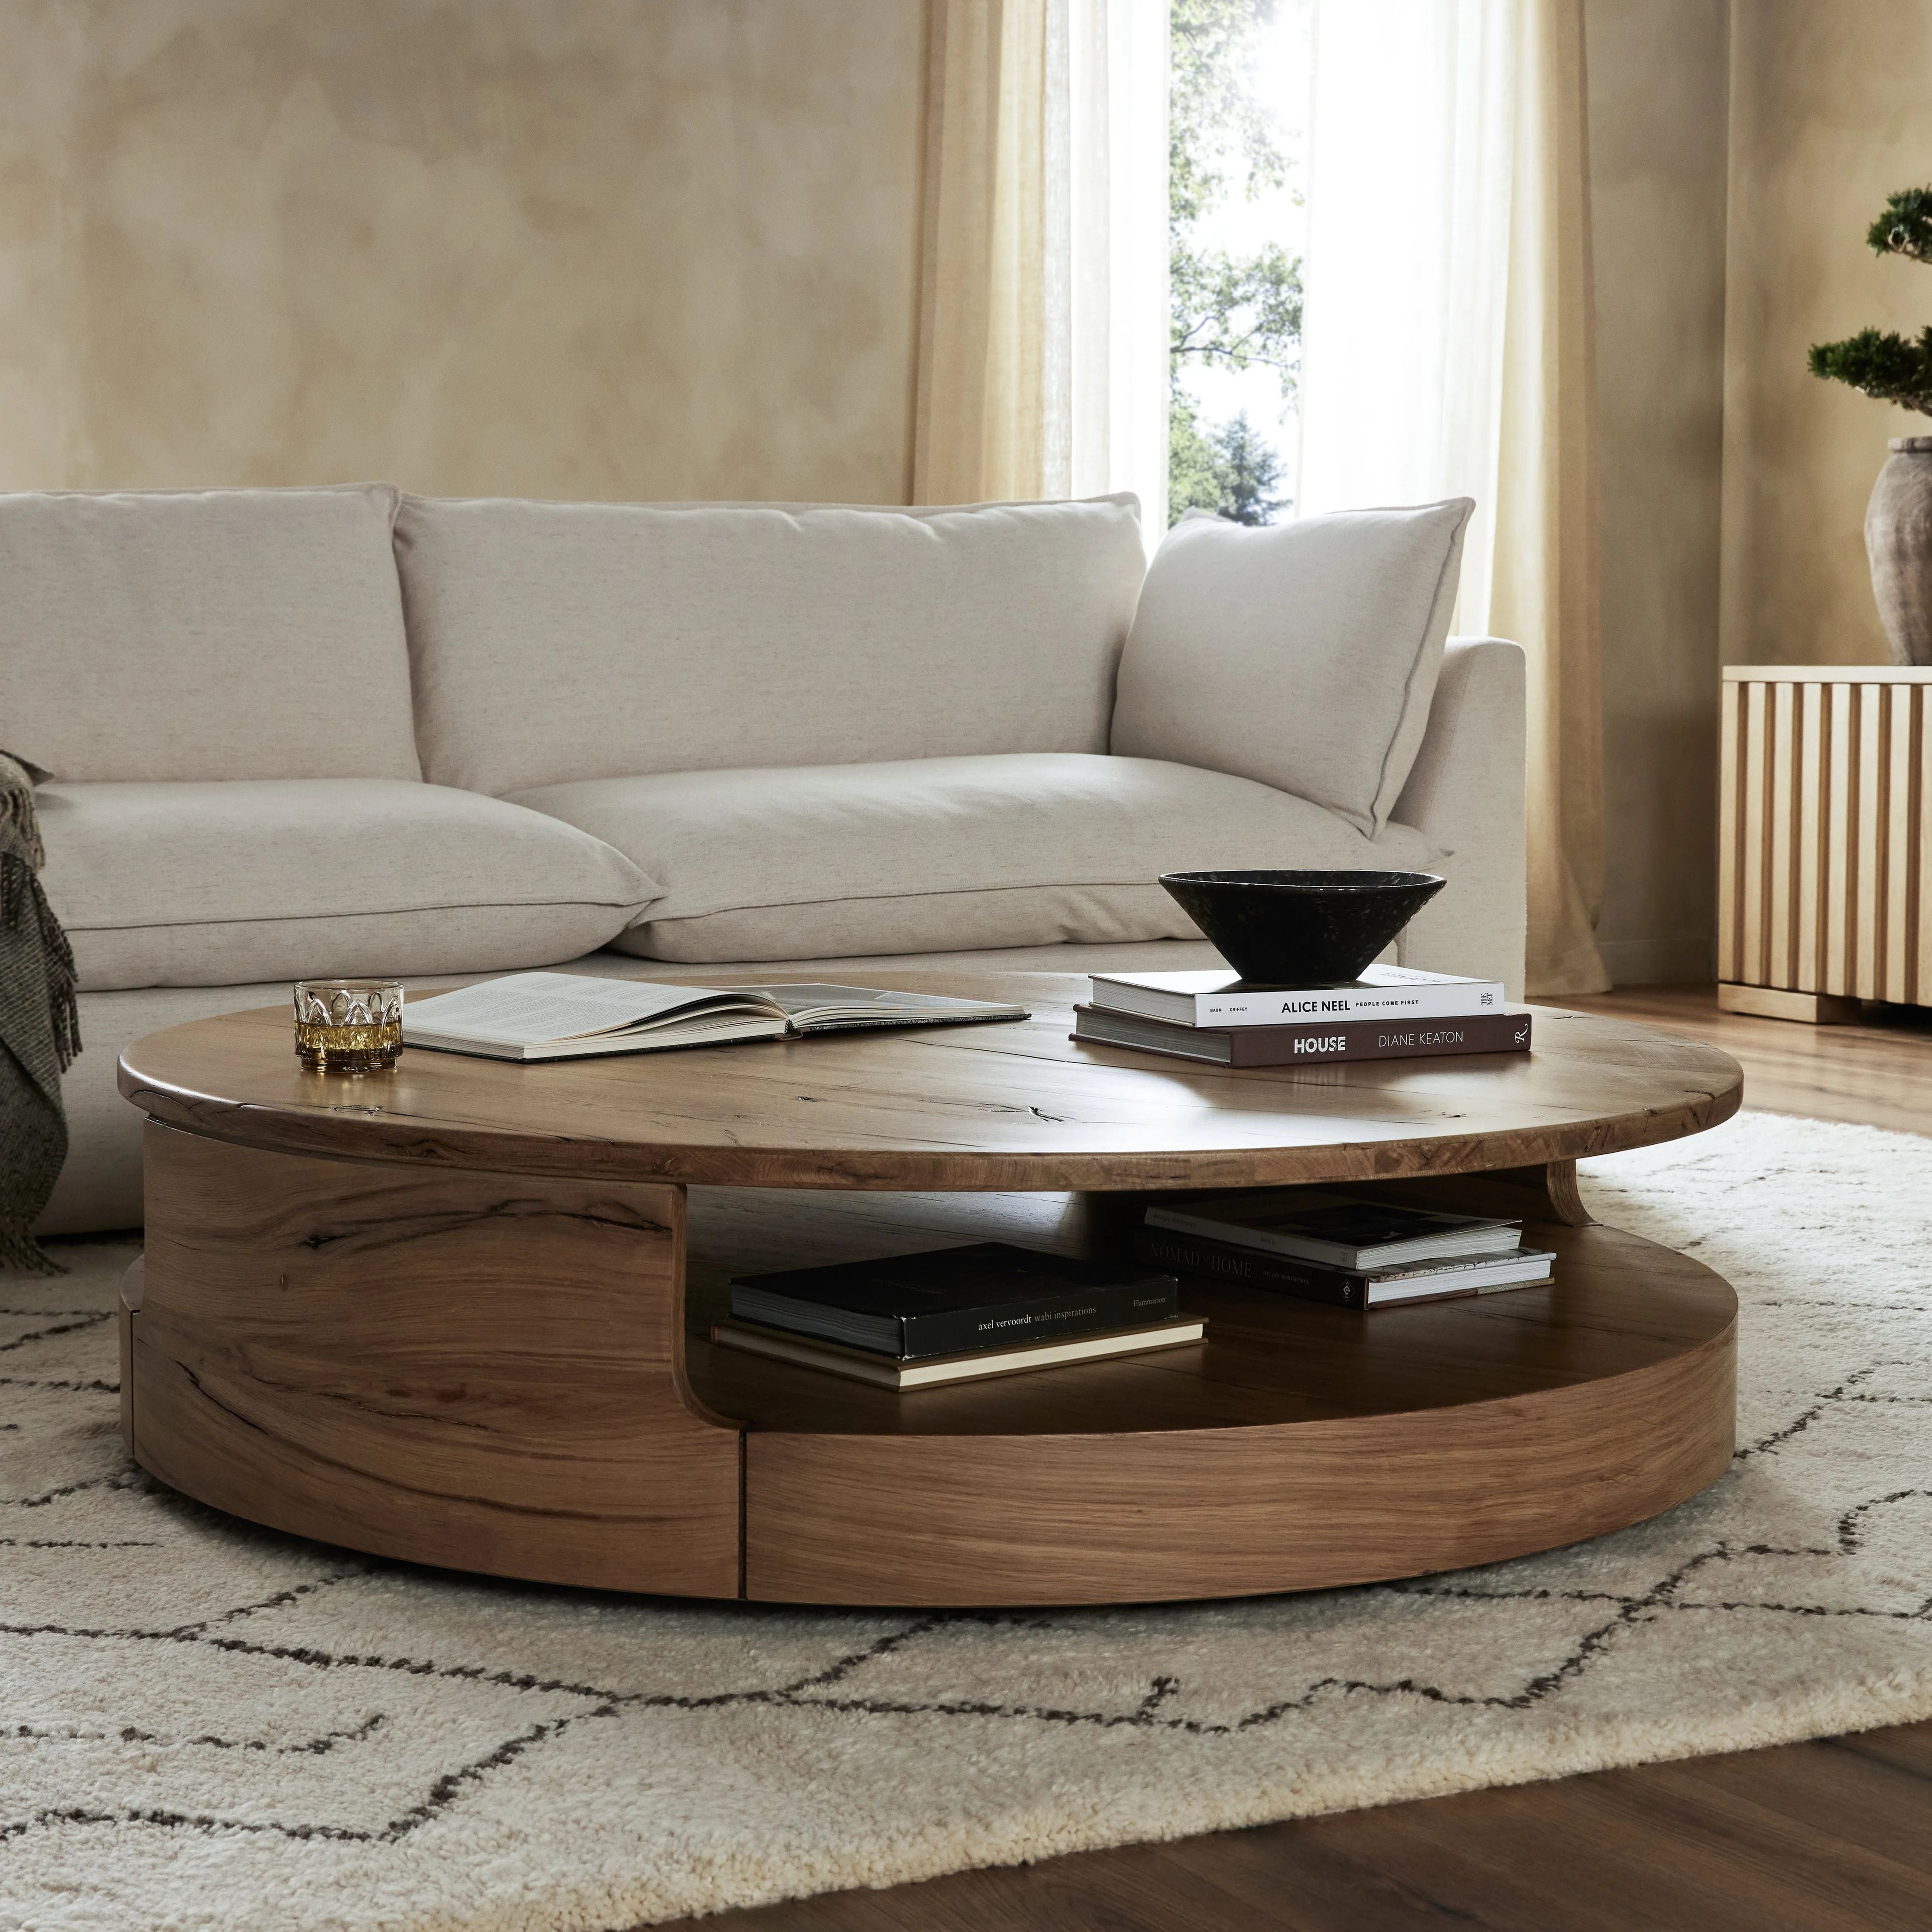 Designed in partnership with longtime Four Hands collaborator Thomas Bina and Brazilian designer Ronald Sasson. A rounded coffee table made from reclaimed French oak, features beautiful natural graining. Lower layer lightens the whole look, while brining the option for bonus storage or display.Collection: Bin Amethyst Home provides interior design, new home construction design consulting, vintage area rugs, and lighting in the Winter Garden metro area.